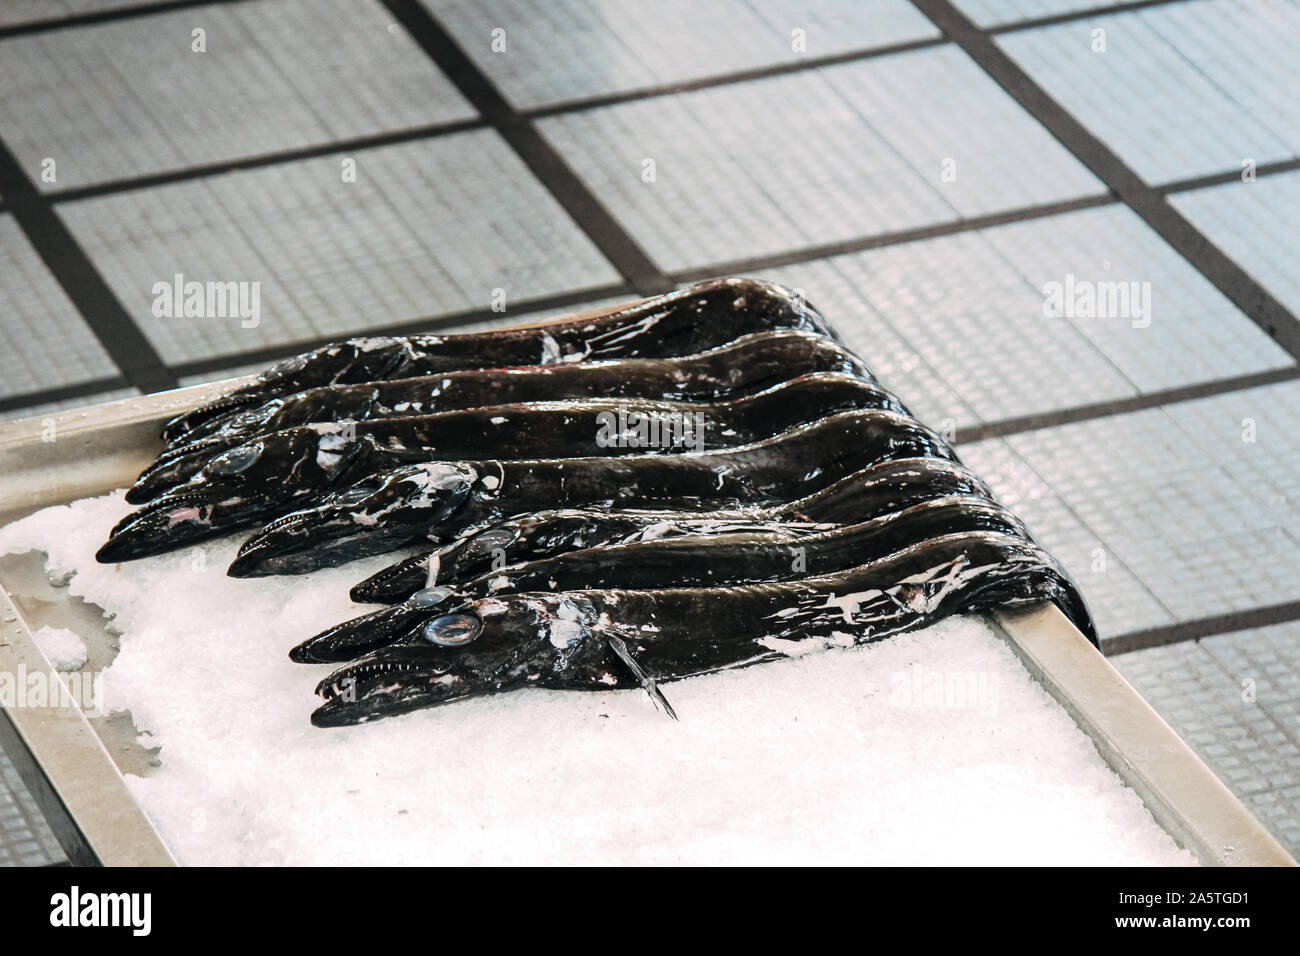 Espada fish on traditional fish market in Funchal, Madeira, Portugal. Black scabbardfish, Aphanopus carbo, is a typical Madeiran dish, usually served with banana. Fish on ice, fishery. Stock Photo